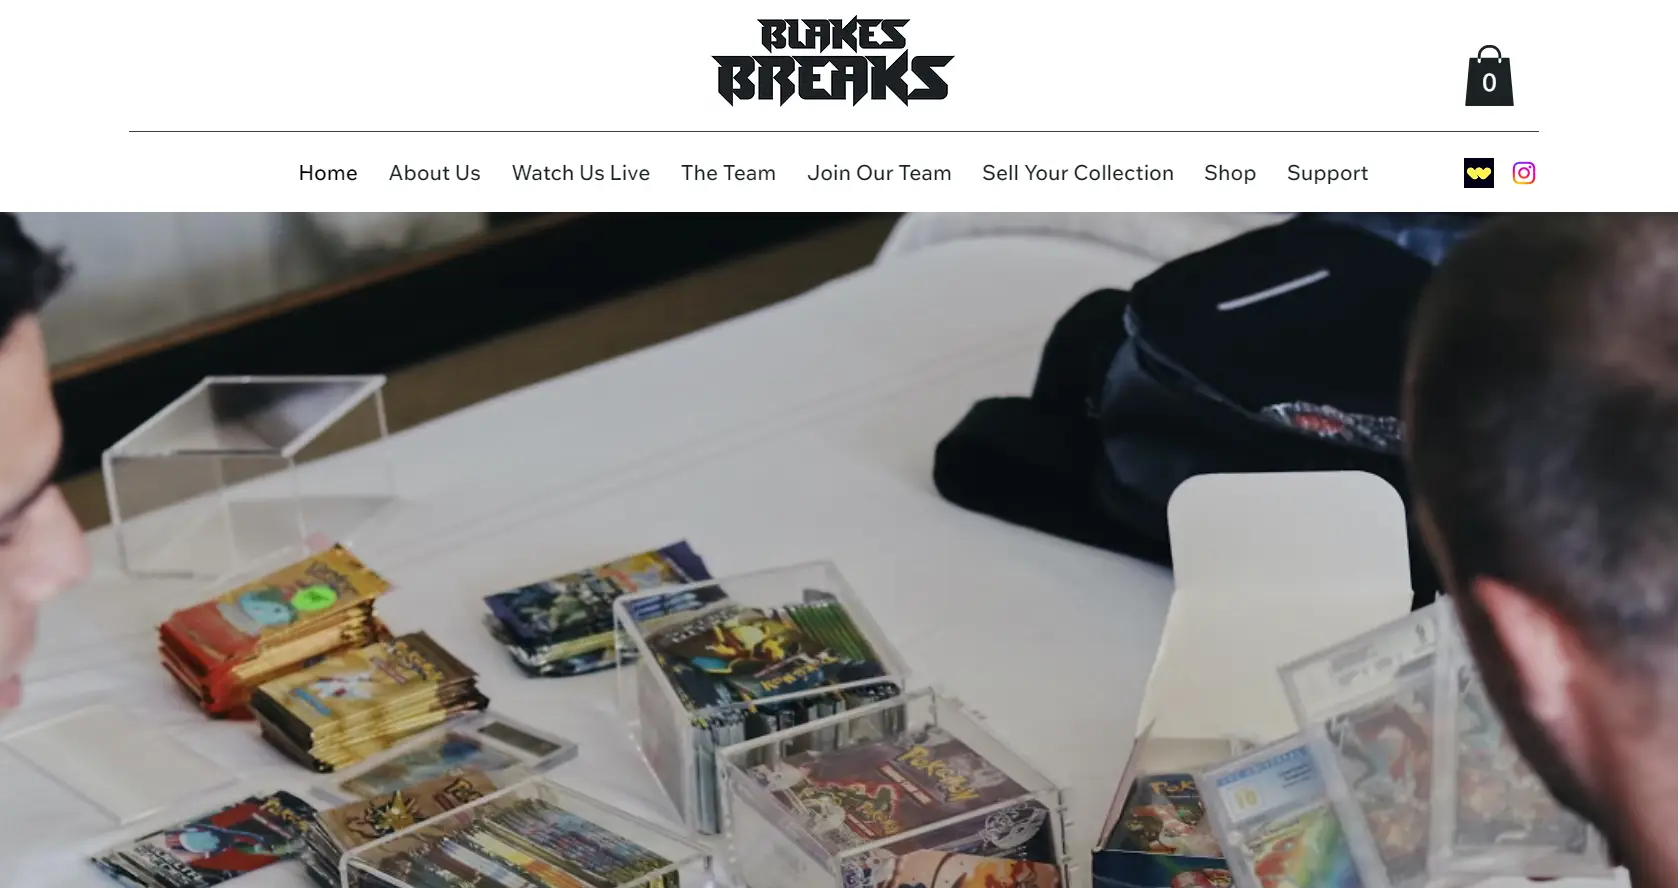 You are currently viewing Is Blakes Breaks Scam Or Legit? – Blakebreaks.Com Reviews